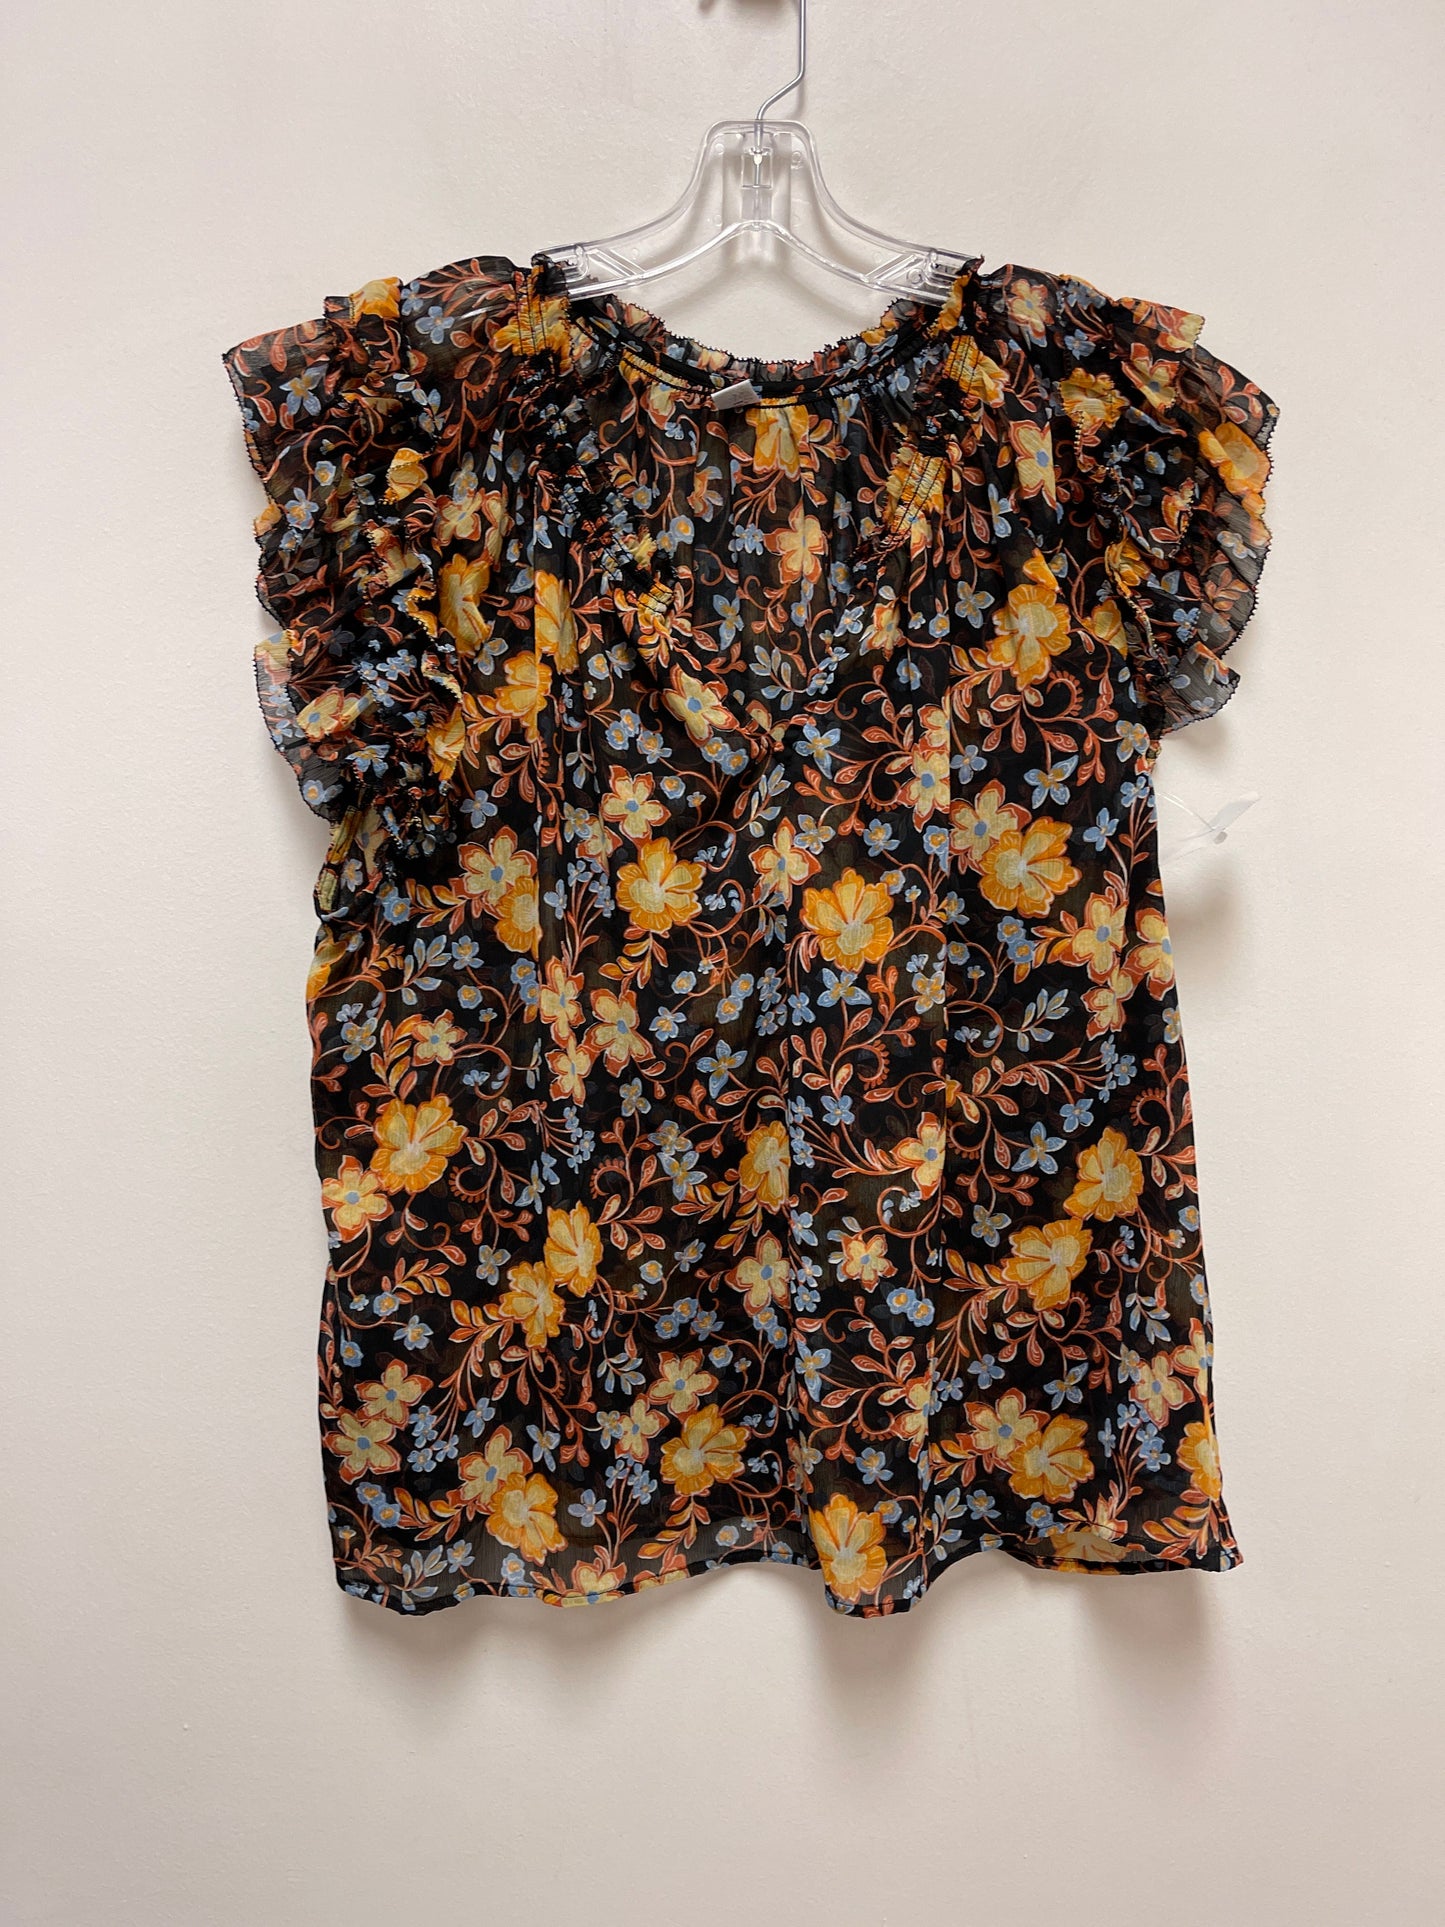 Floral Print Top Short Sleeve Old Navy, Size 2x